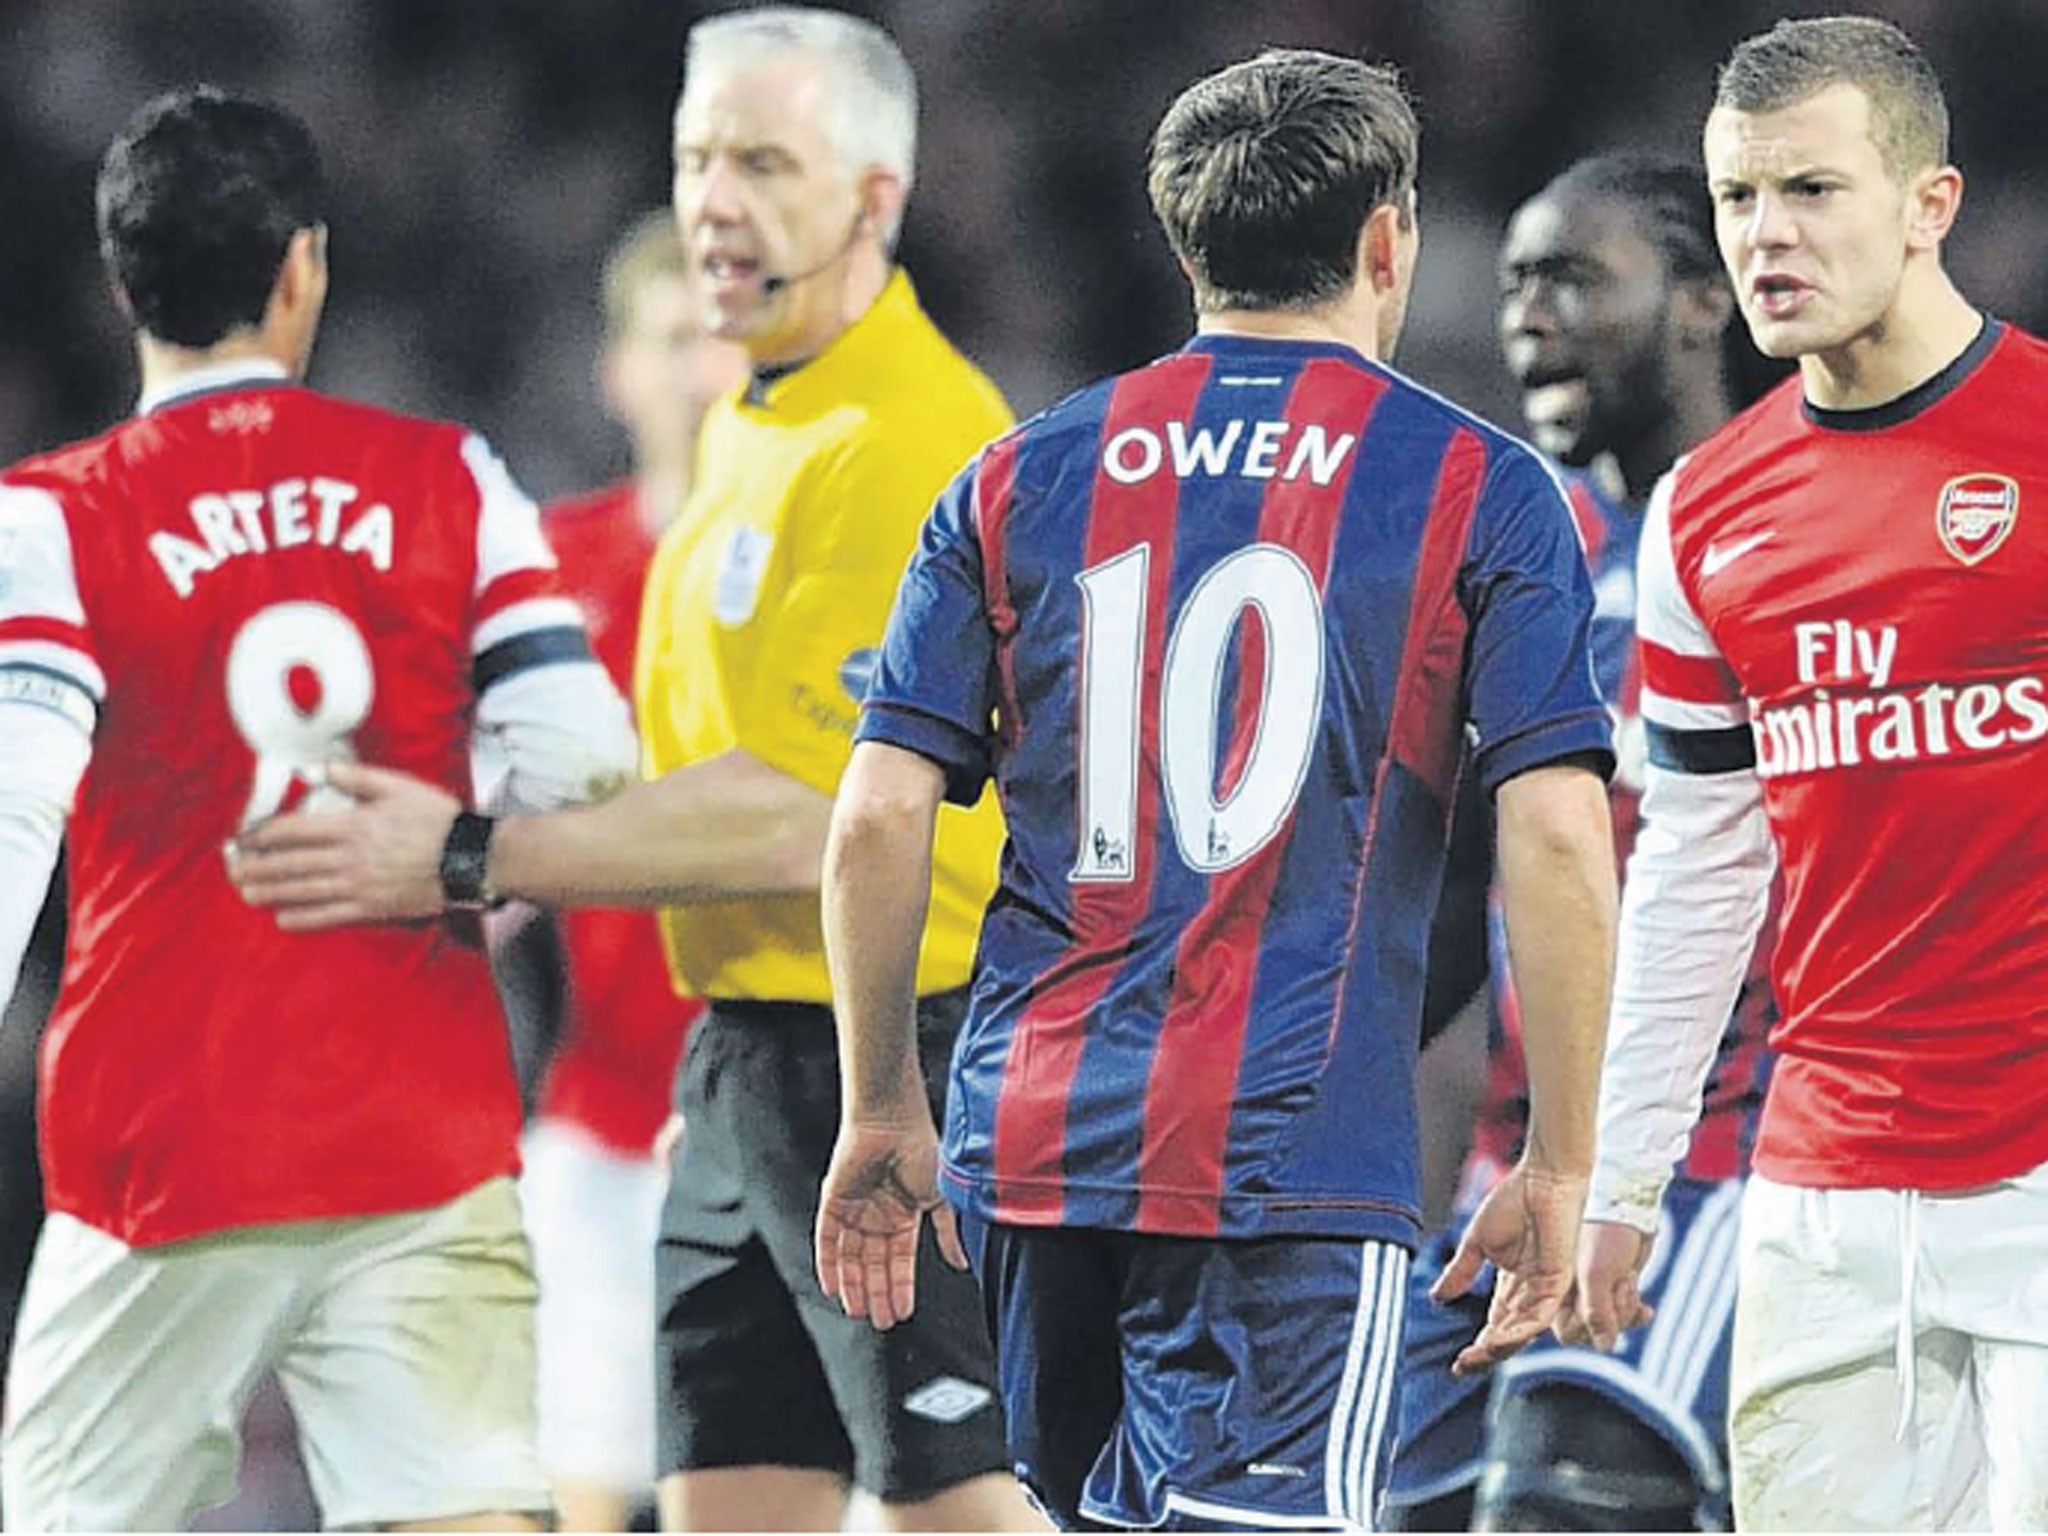 Arsenal’s Jack Wilshere clashes with Michael Owen